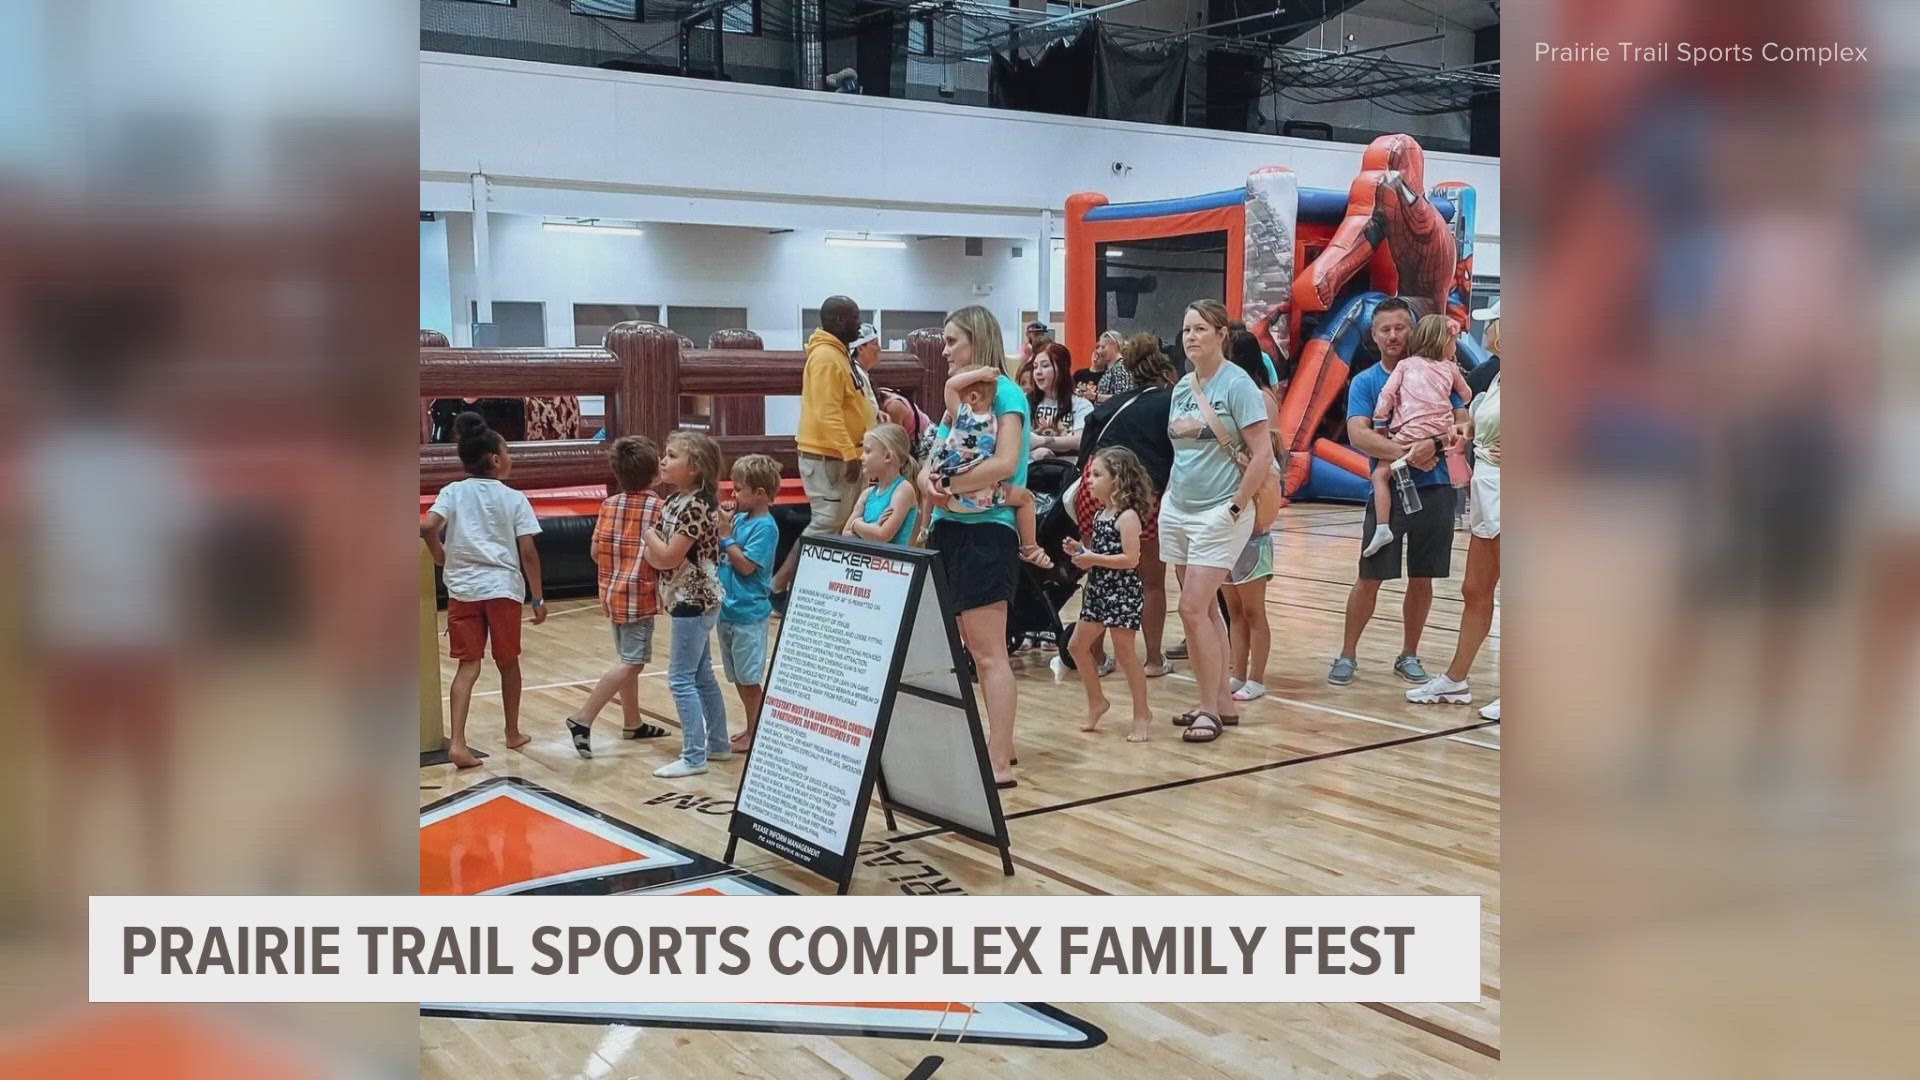 The Prairie Trail Sports Complex Family Fest is Saturday, June 29 from 4-7 p.m.